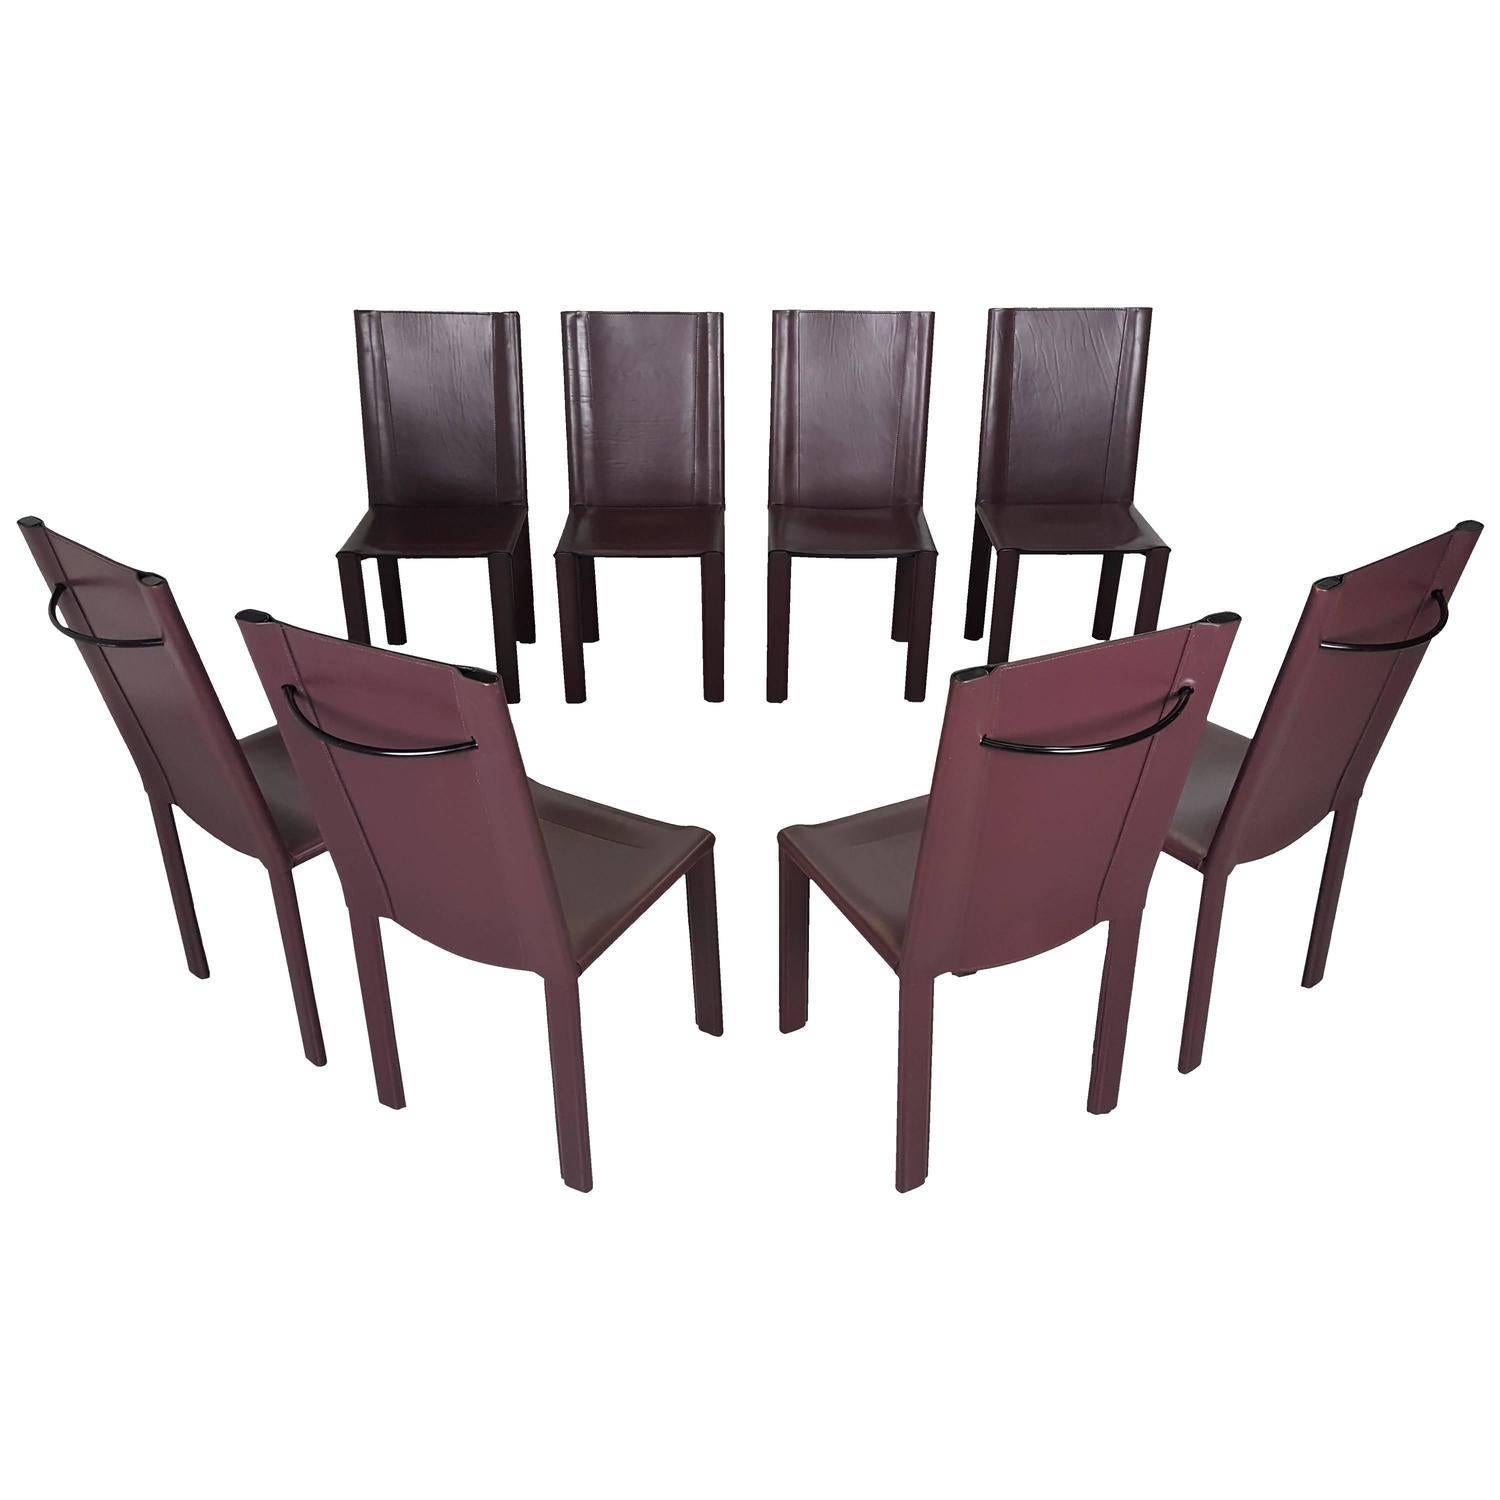 Sophisticated set of eight dining chairs in bordeaux leather by Matteo Grassi, Italy. Incredibly heavy and well constructed; remarkable craftsmanship. Embossed 